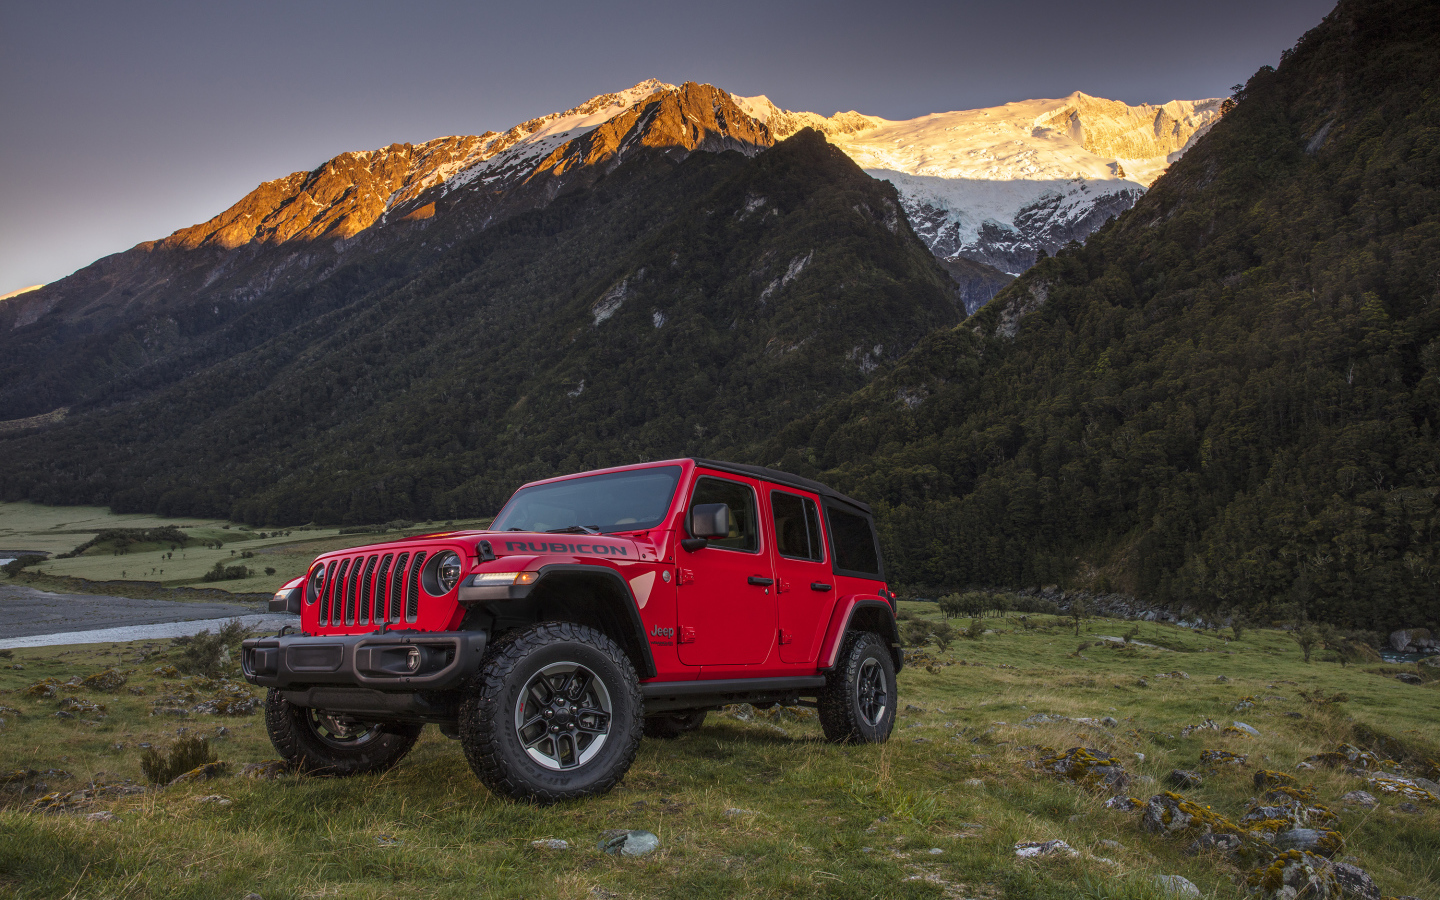 Red car Jeep Wrangler on the background of the mountains